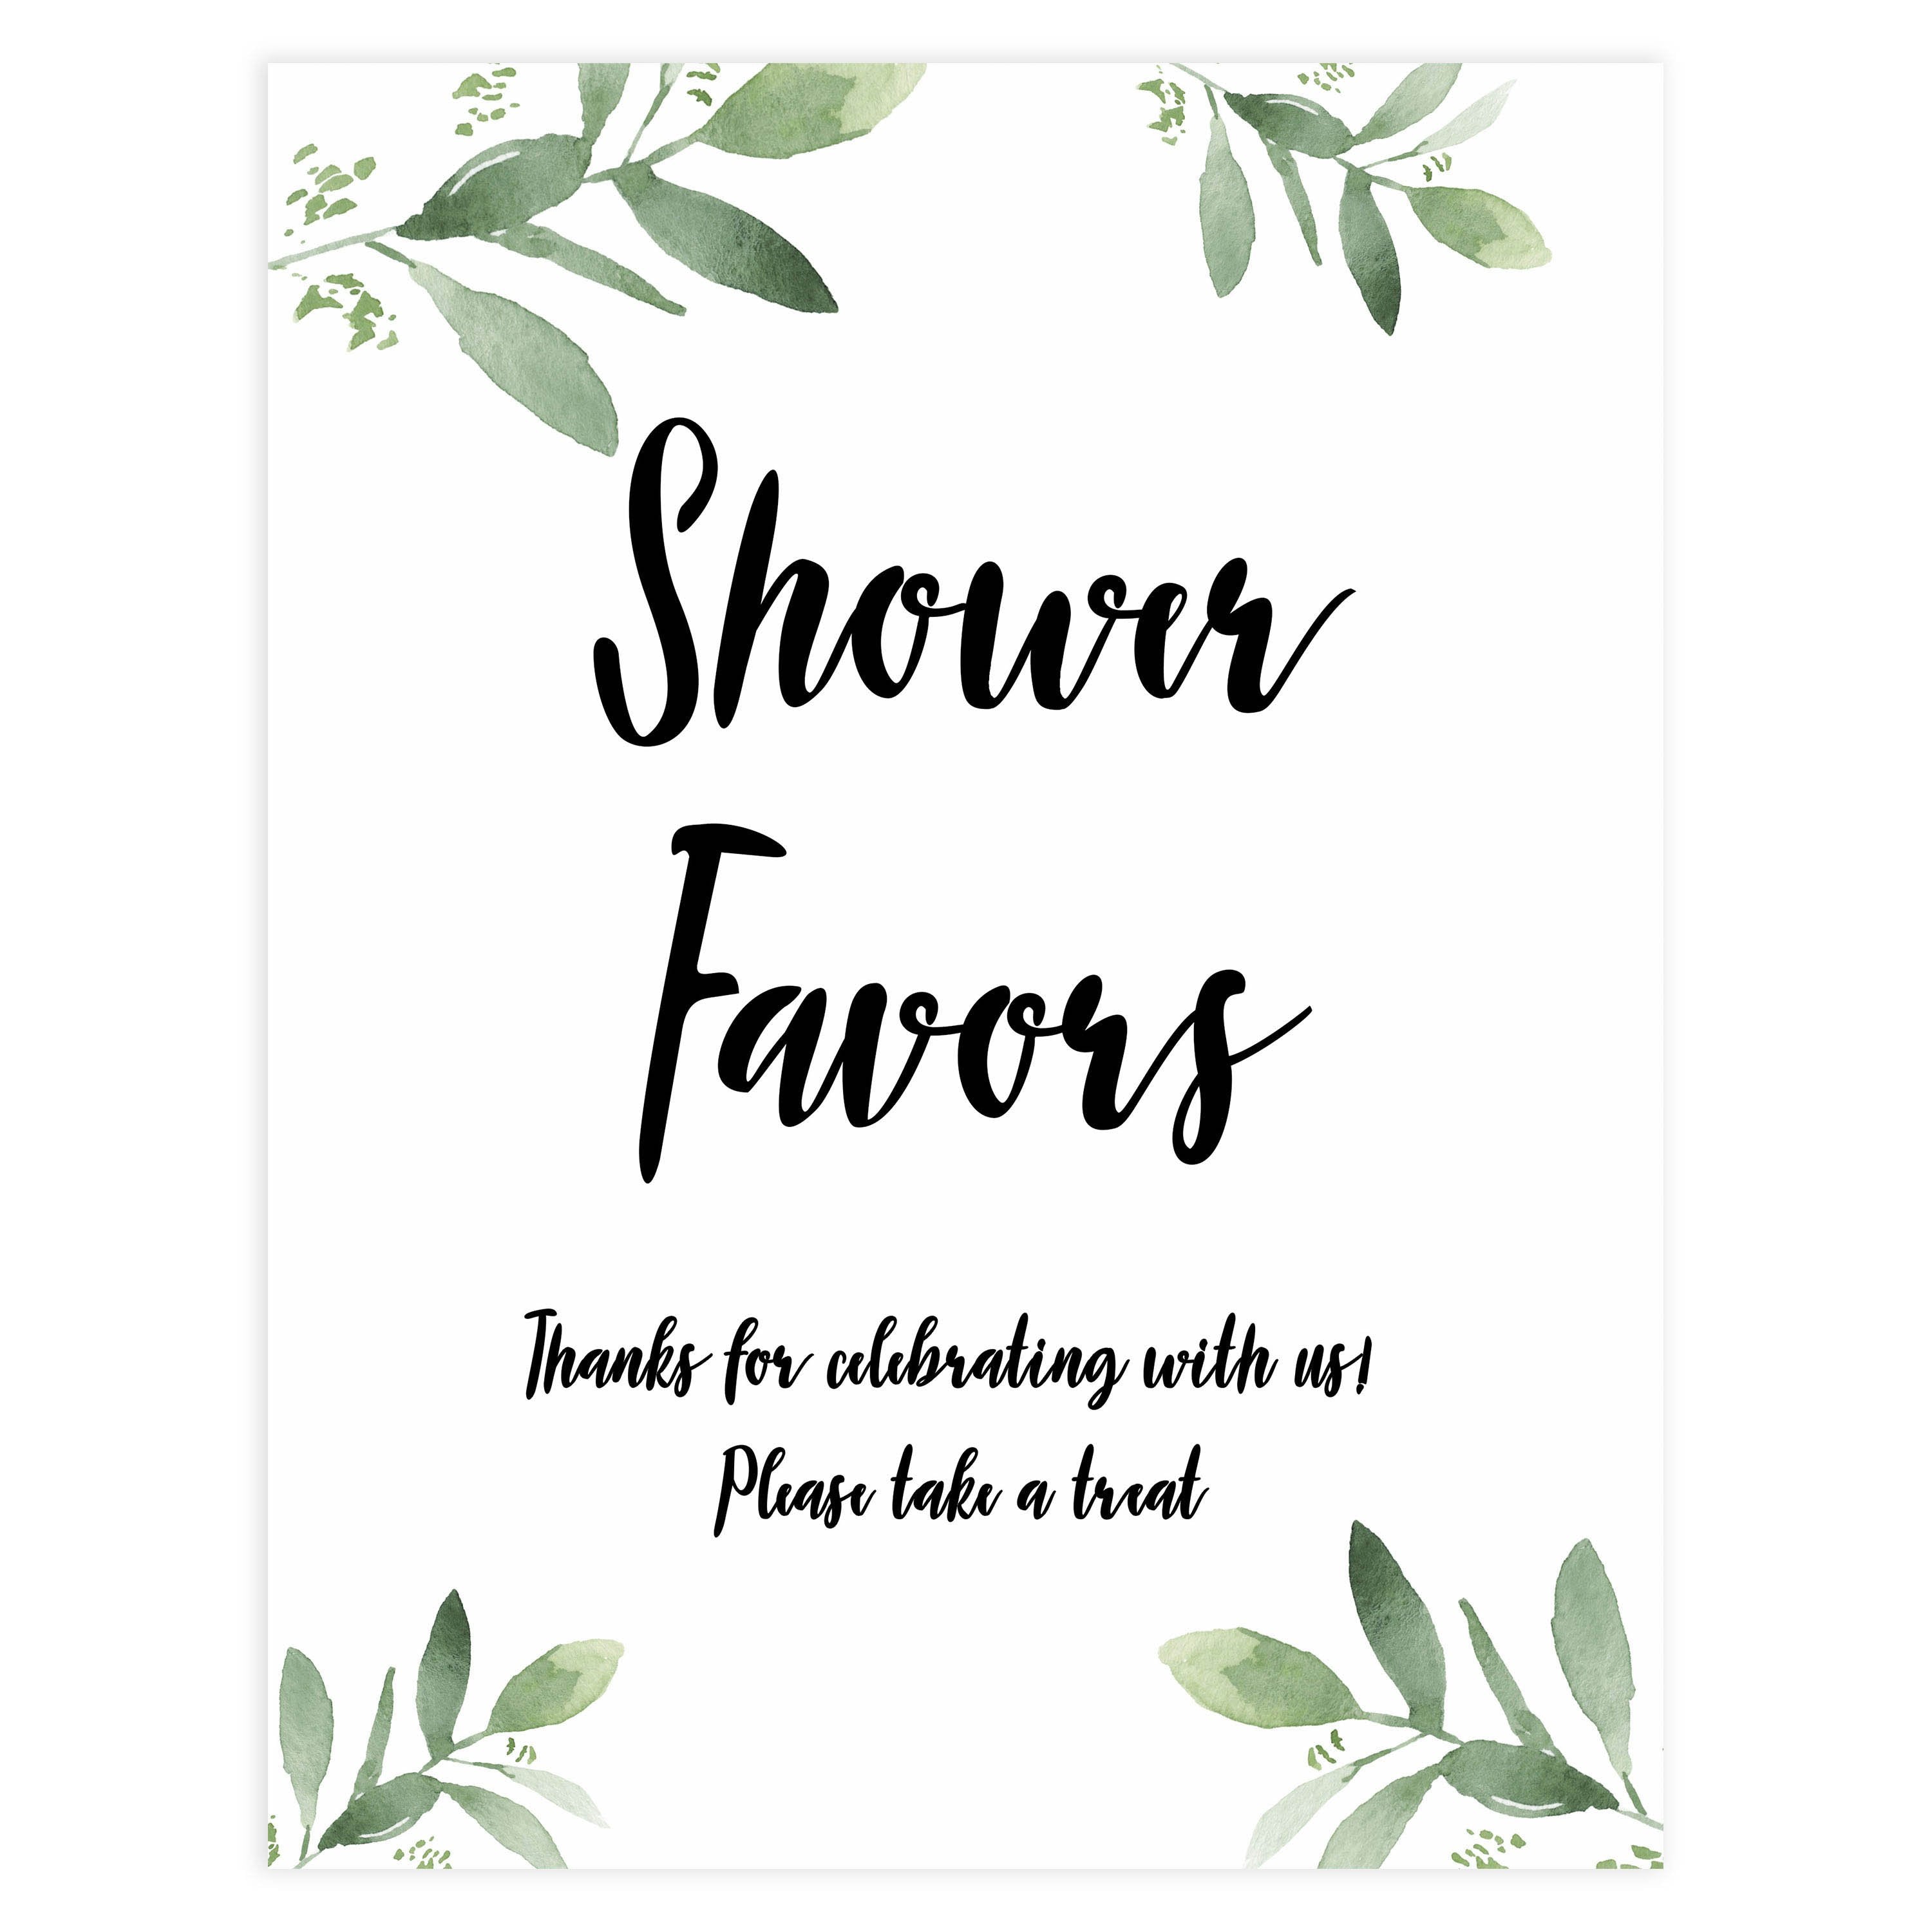 baby favors sign, baby shower signs, printable baby shower signs, botanical baby shower decor, floral baby table signs